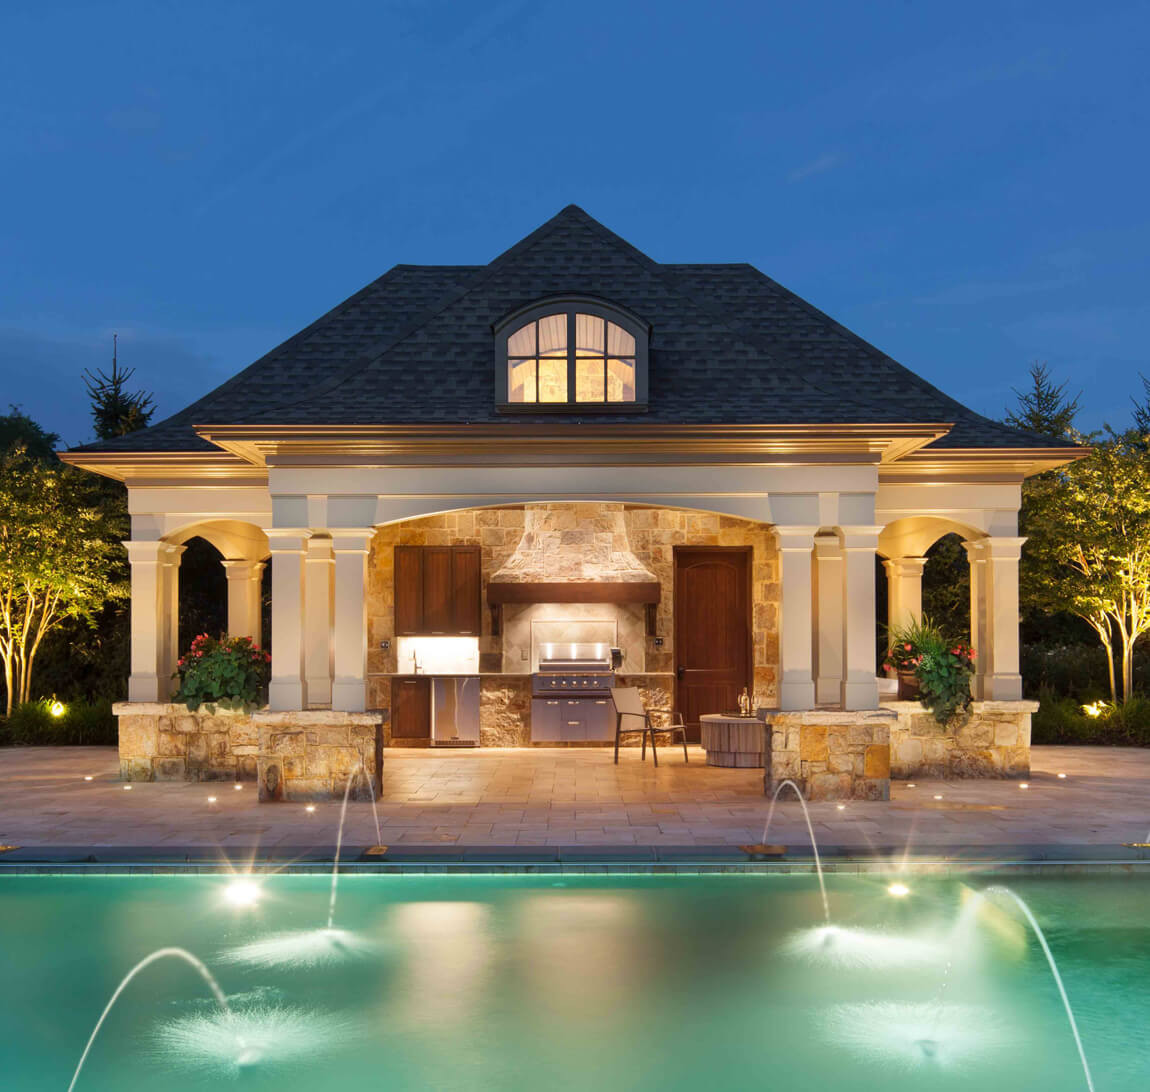 Pool With Outdoor Kitchen
 Everything You Need to Know to Plan Your Outside Kitchen